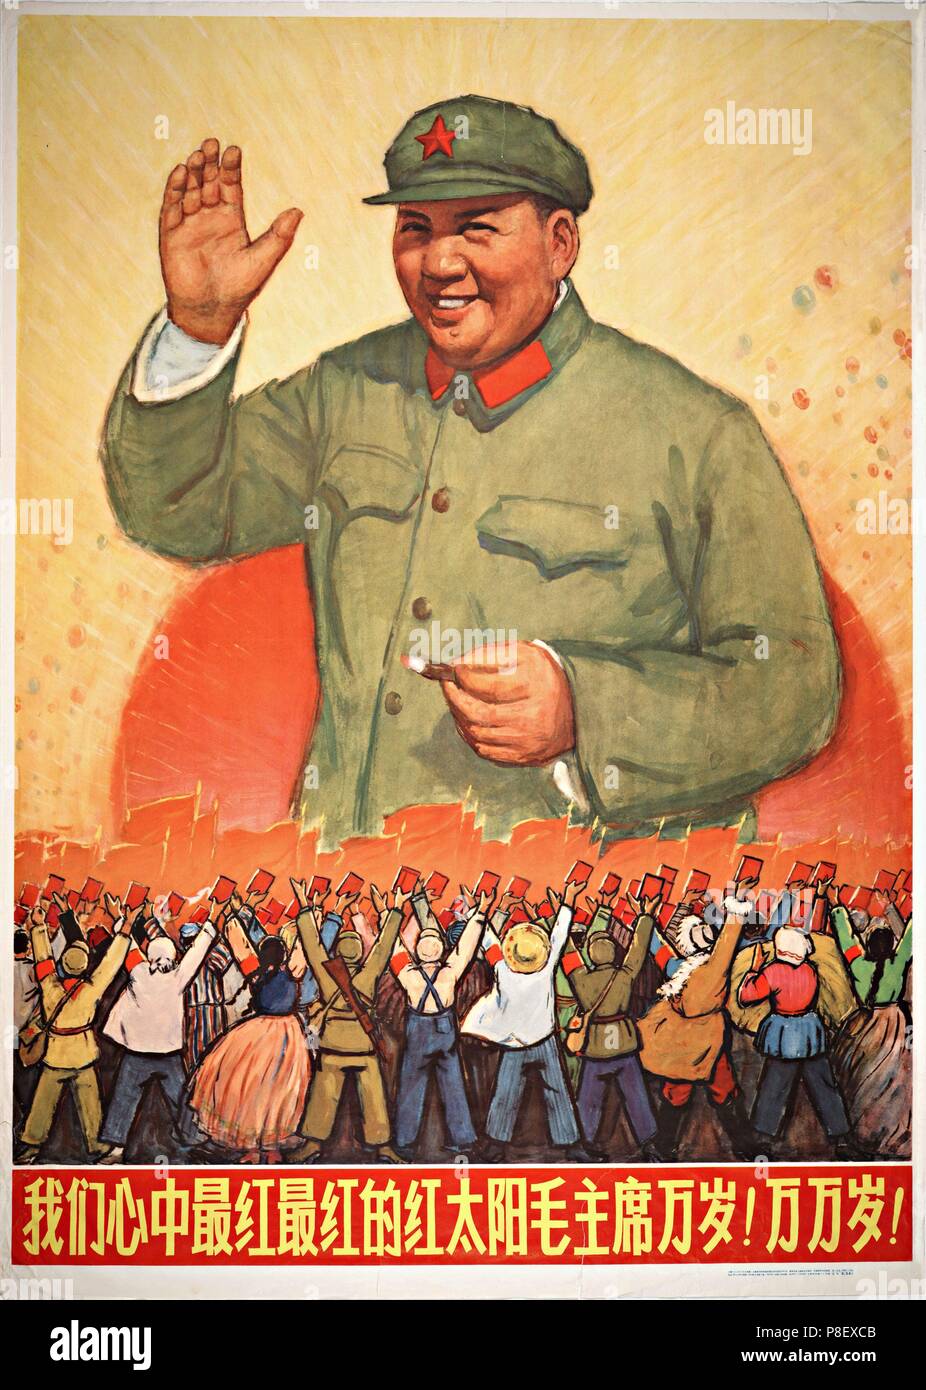 Raise High the Great Red Flag of Mao Zedong Thought to Carry Out to the End the Great Proletarian Cultural Revolution. Museum: PRIVATE COLLECTION. Stock Photo